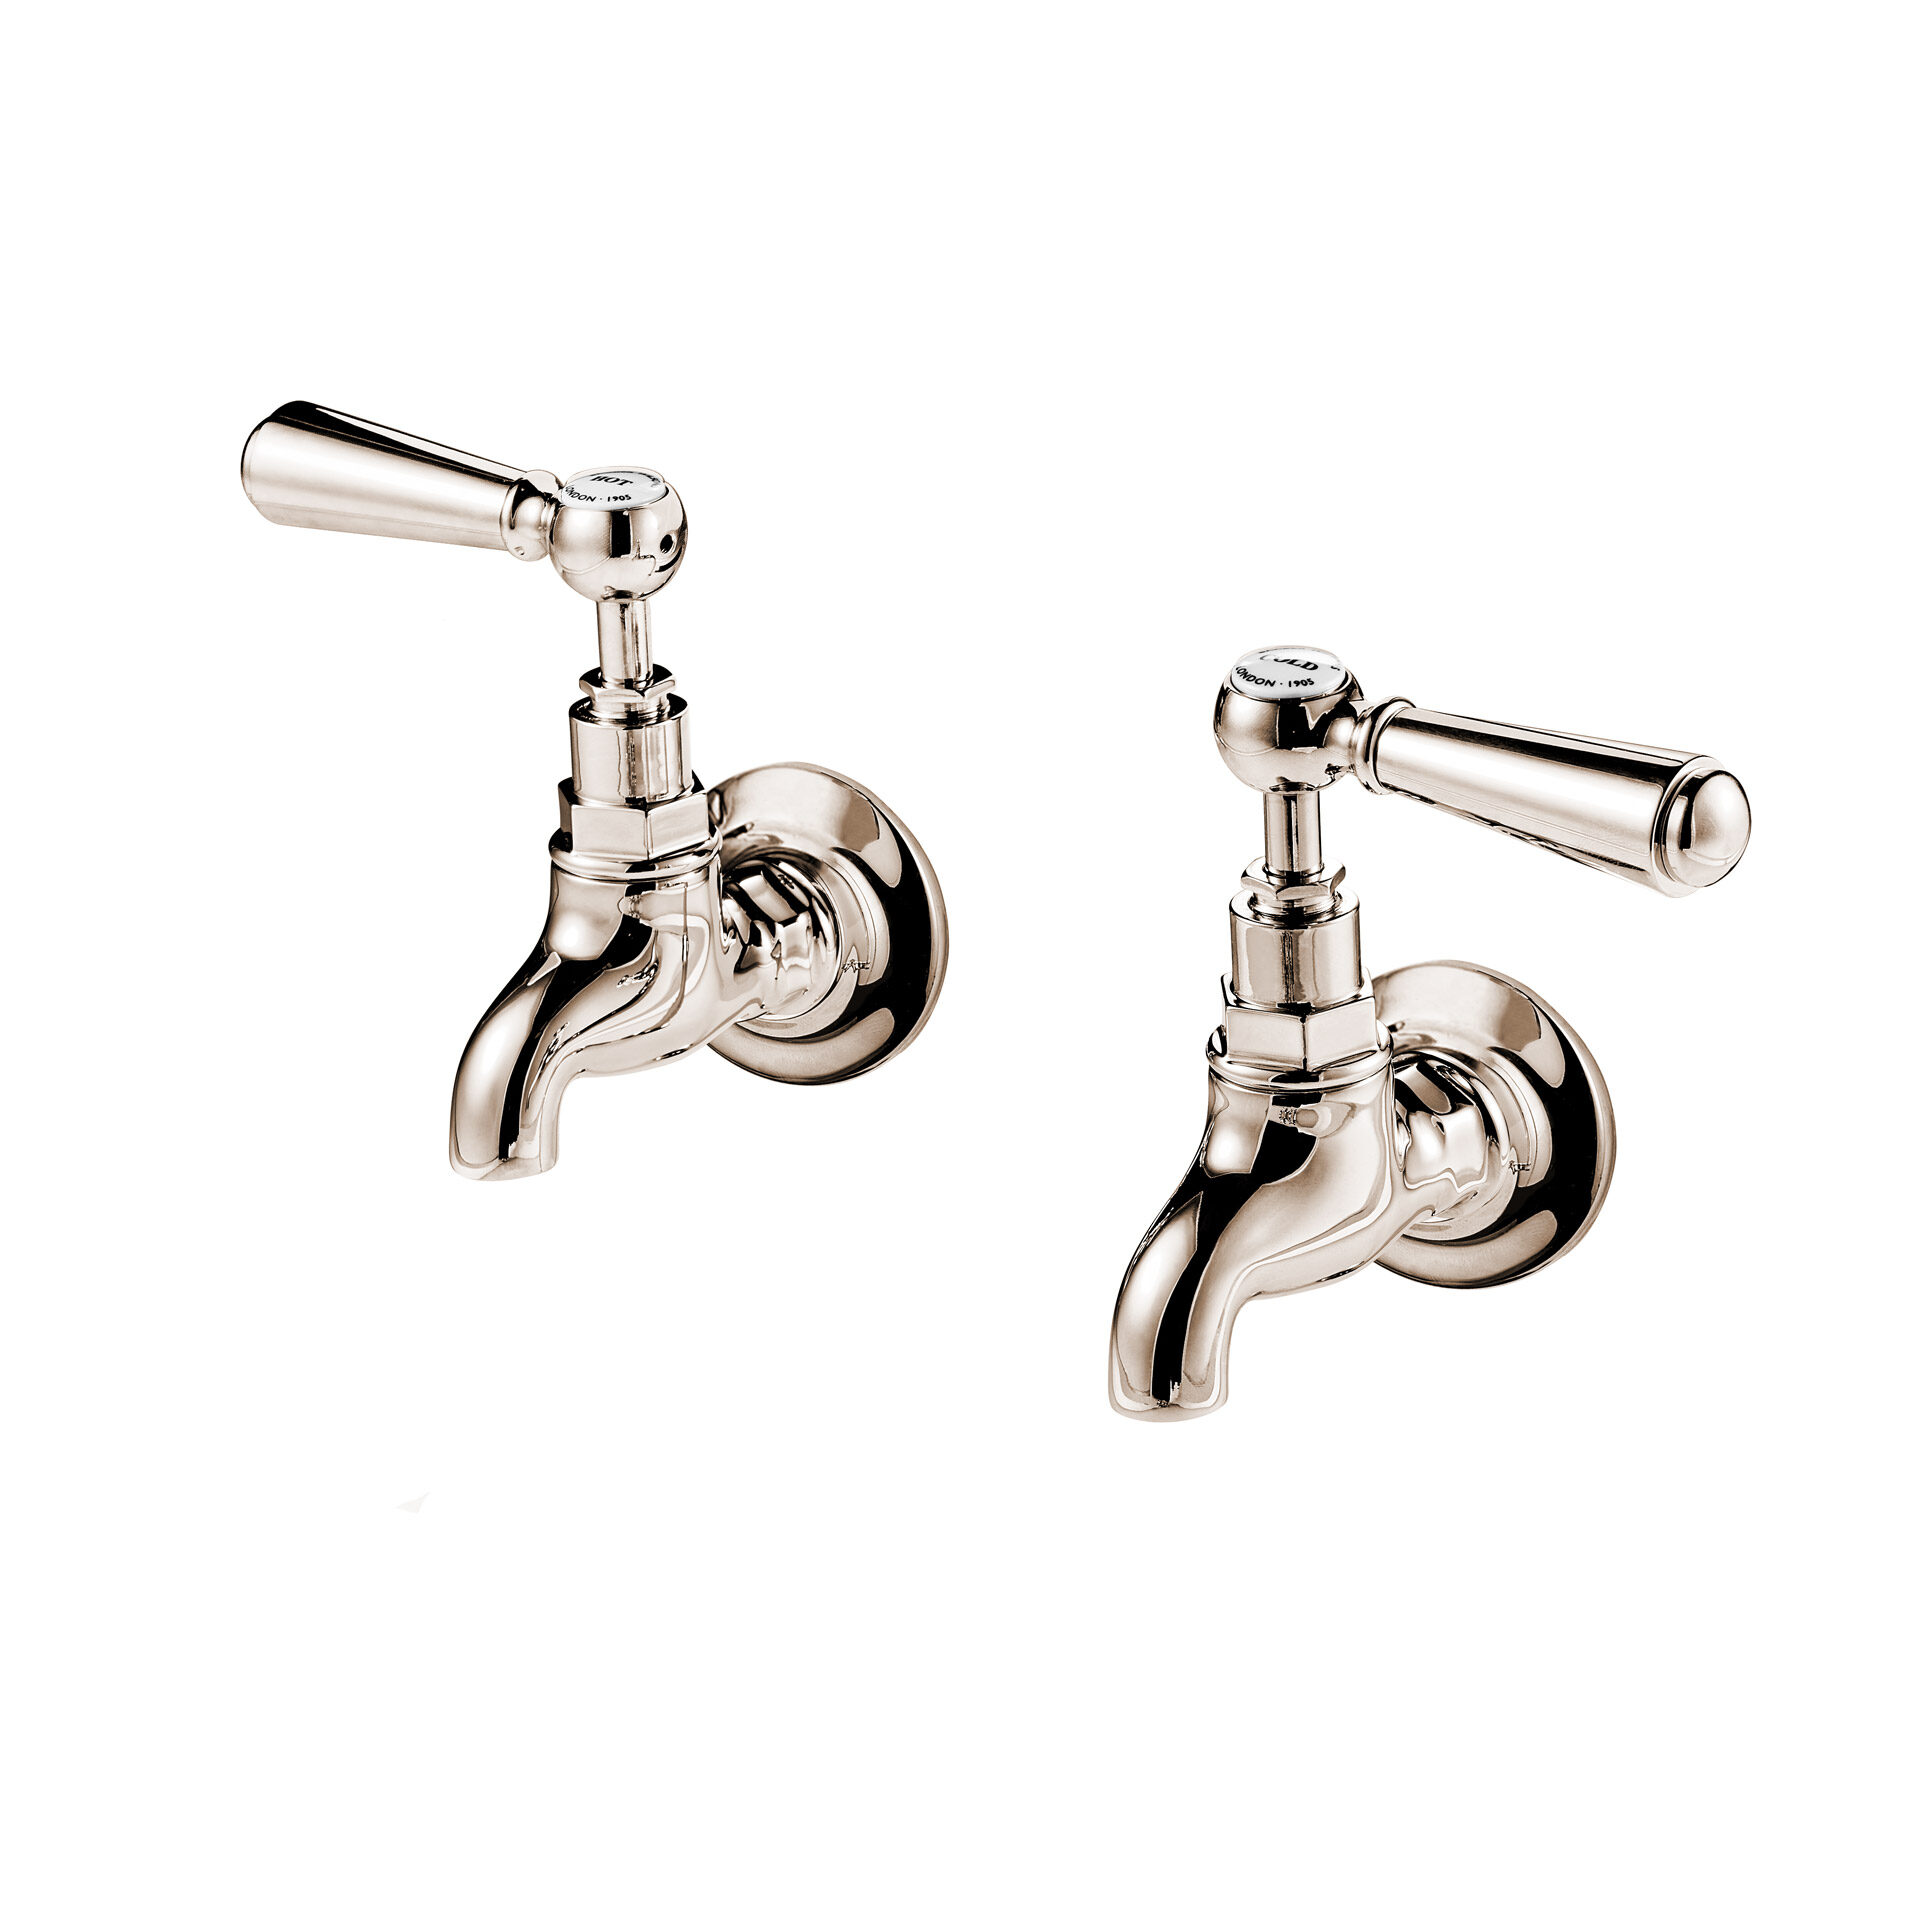 1890’S style wall mounted bib taps with metal lever handle British made